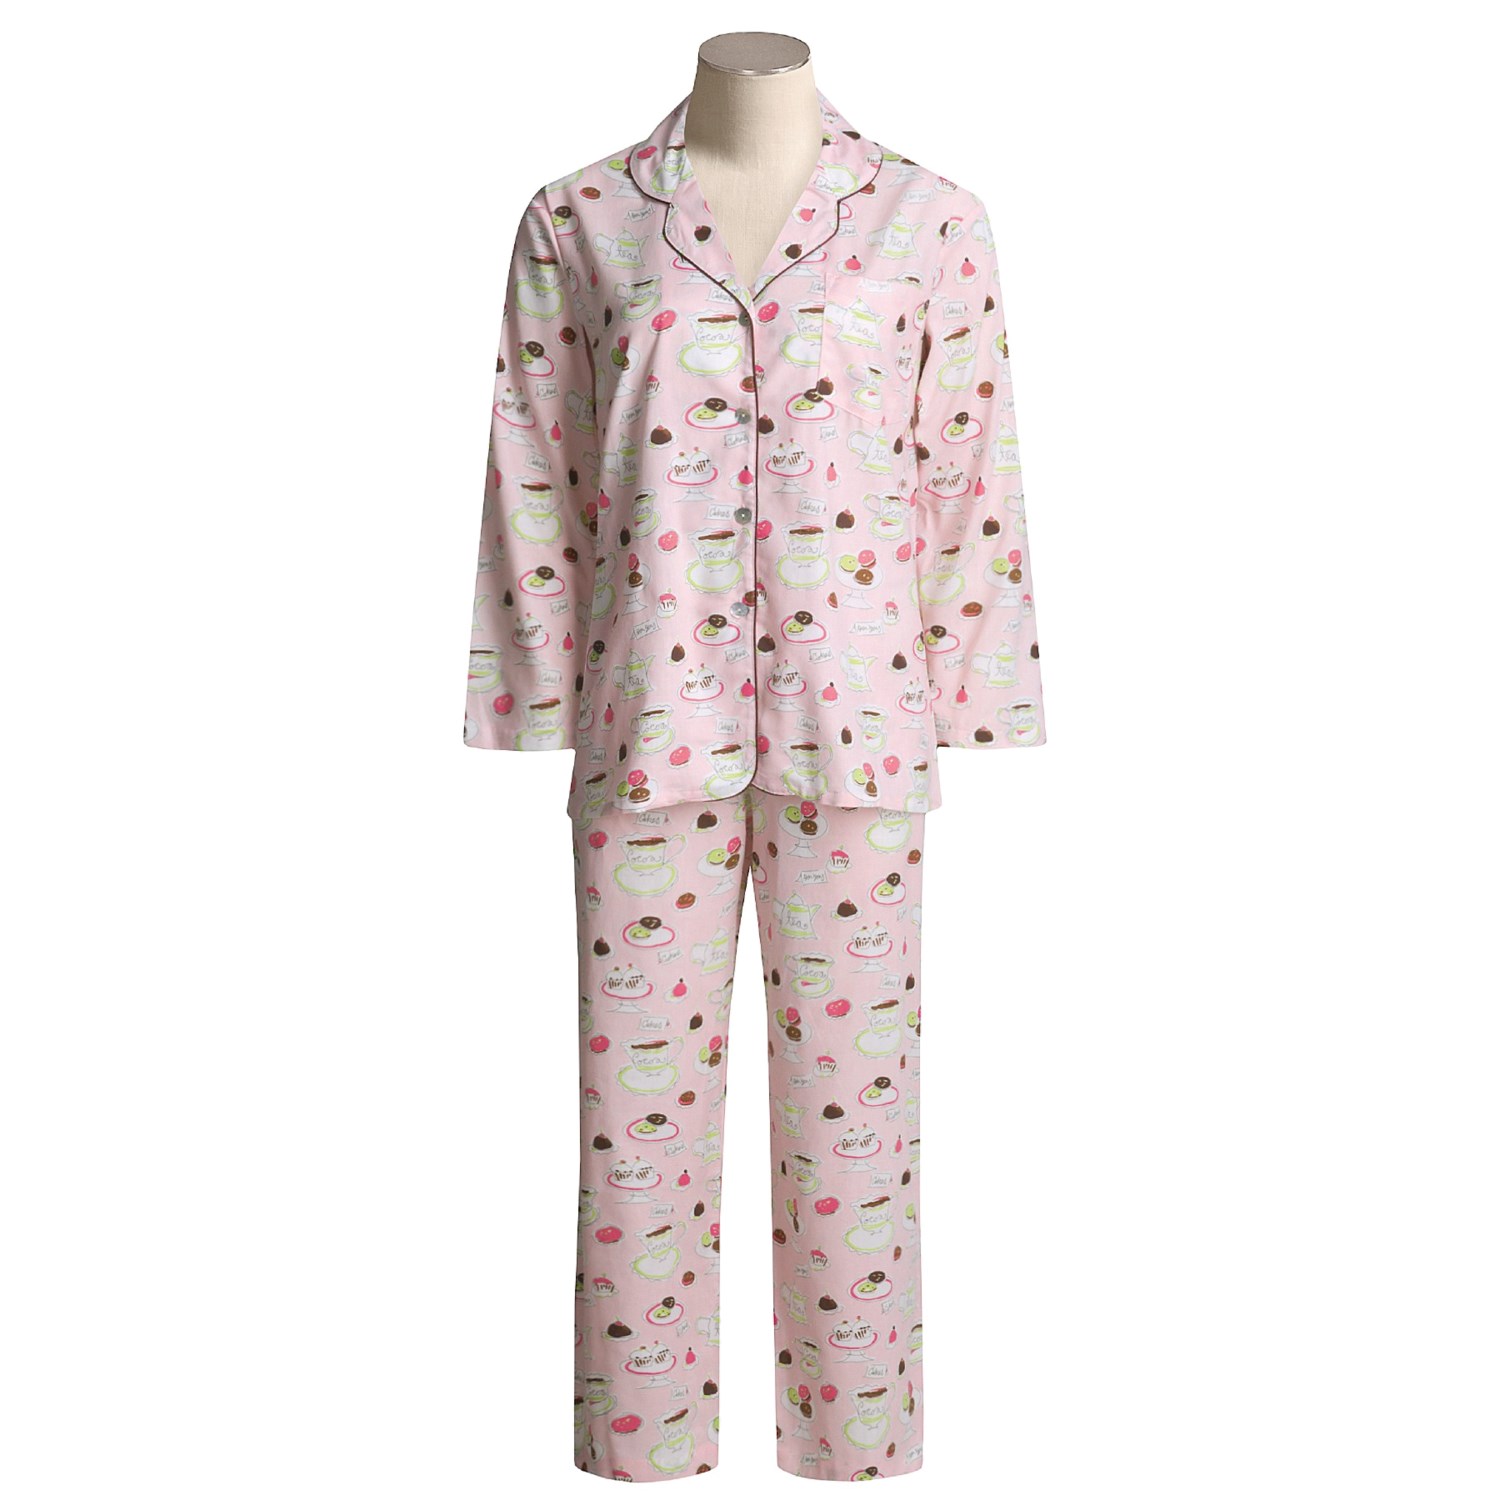 Crabtree & Evelyn Novelty Print Pajamas (For Women) 1219N - Save 43%